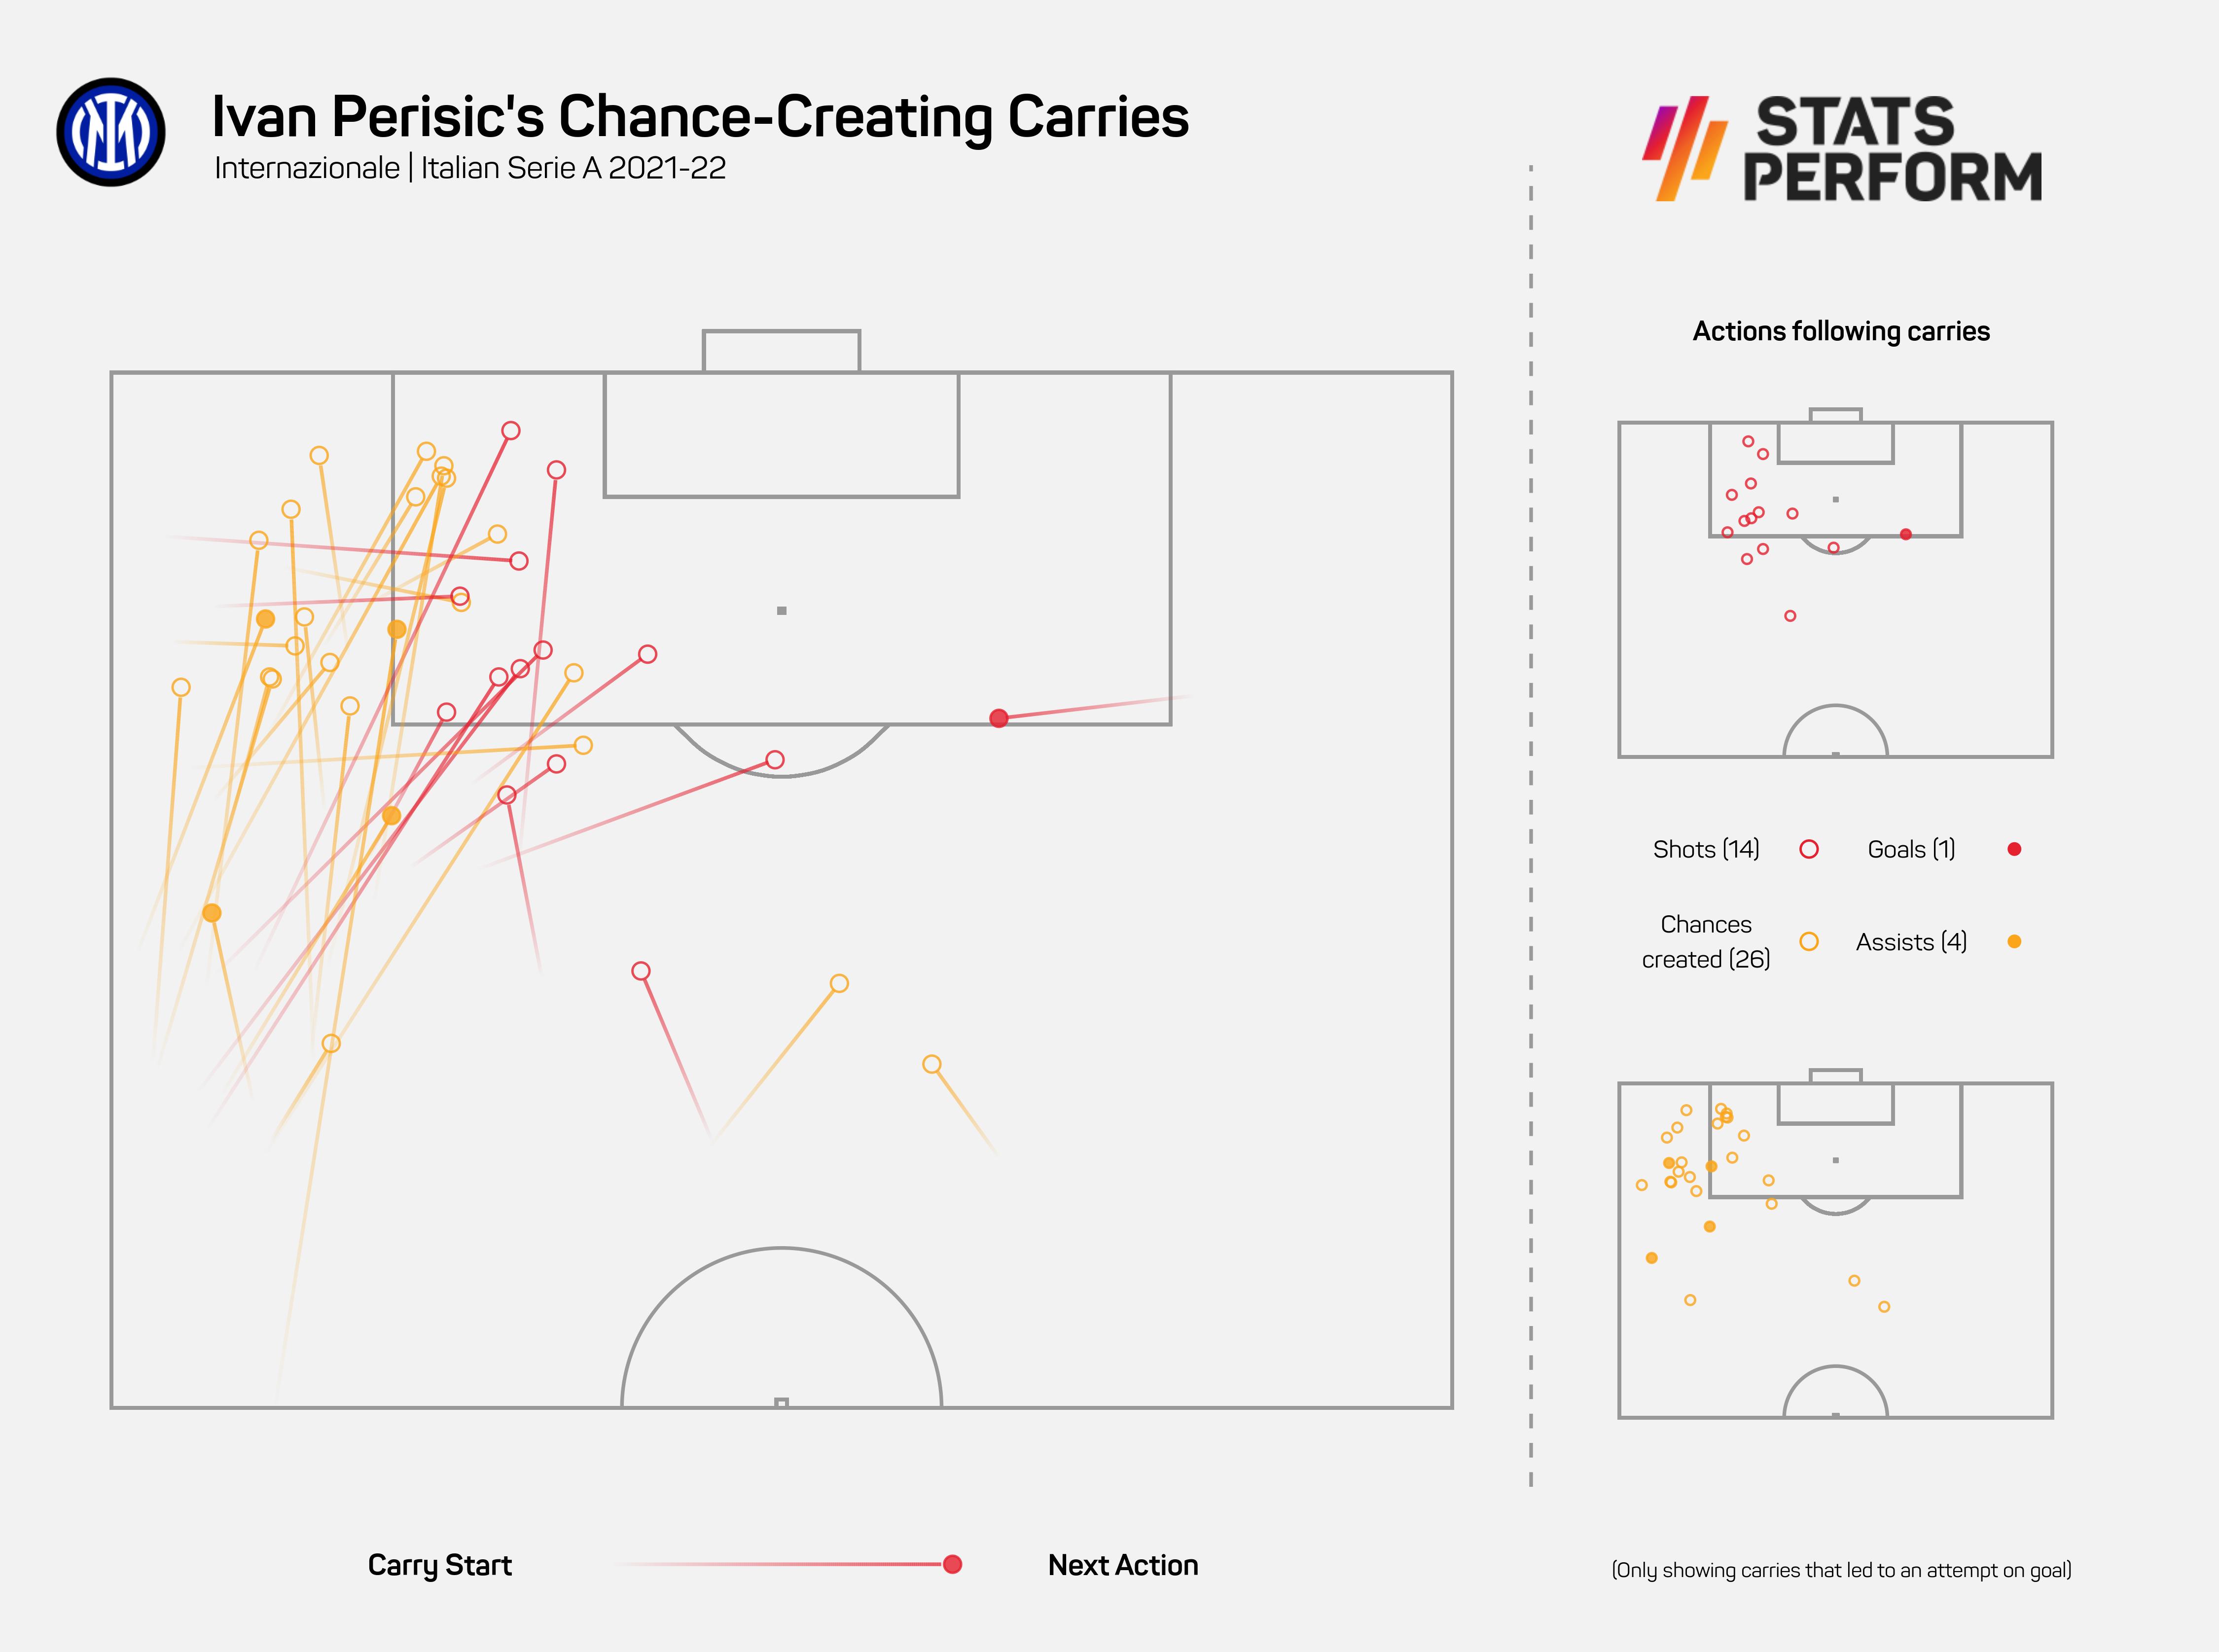 Ivan Perisic led the way for chances created following ball carries in Serie A last season